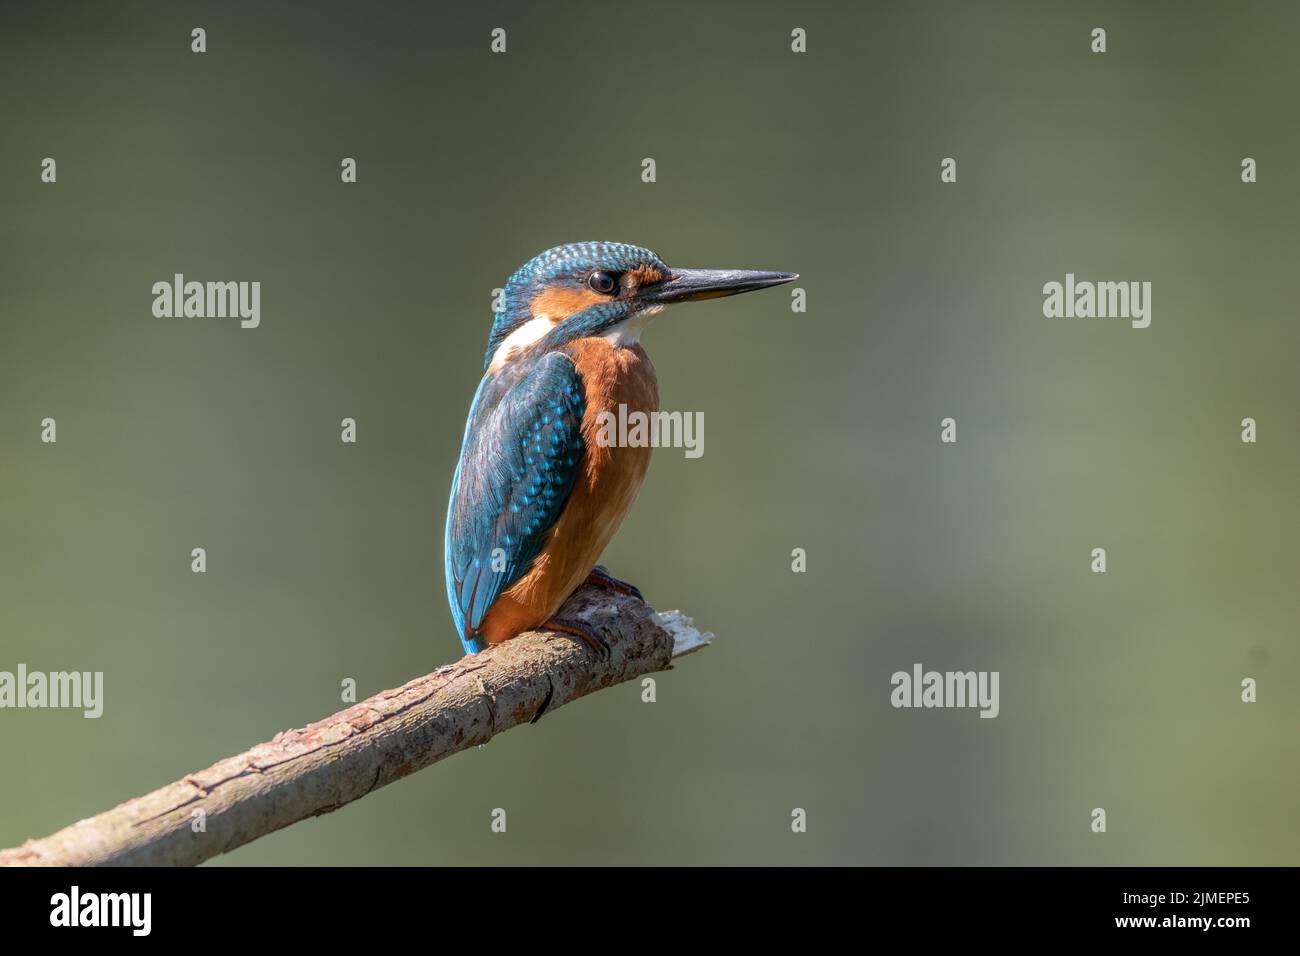 Common Kingfisher (Alcedo atthis), Wales, Uk, sat on perch in drought conditions in Britain during heatwave -climate change or  global warming. Stock Photo